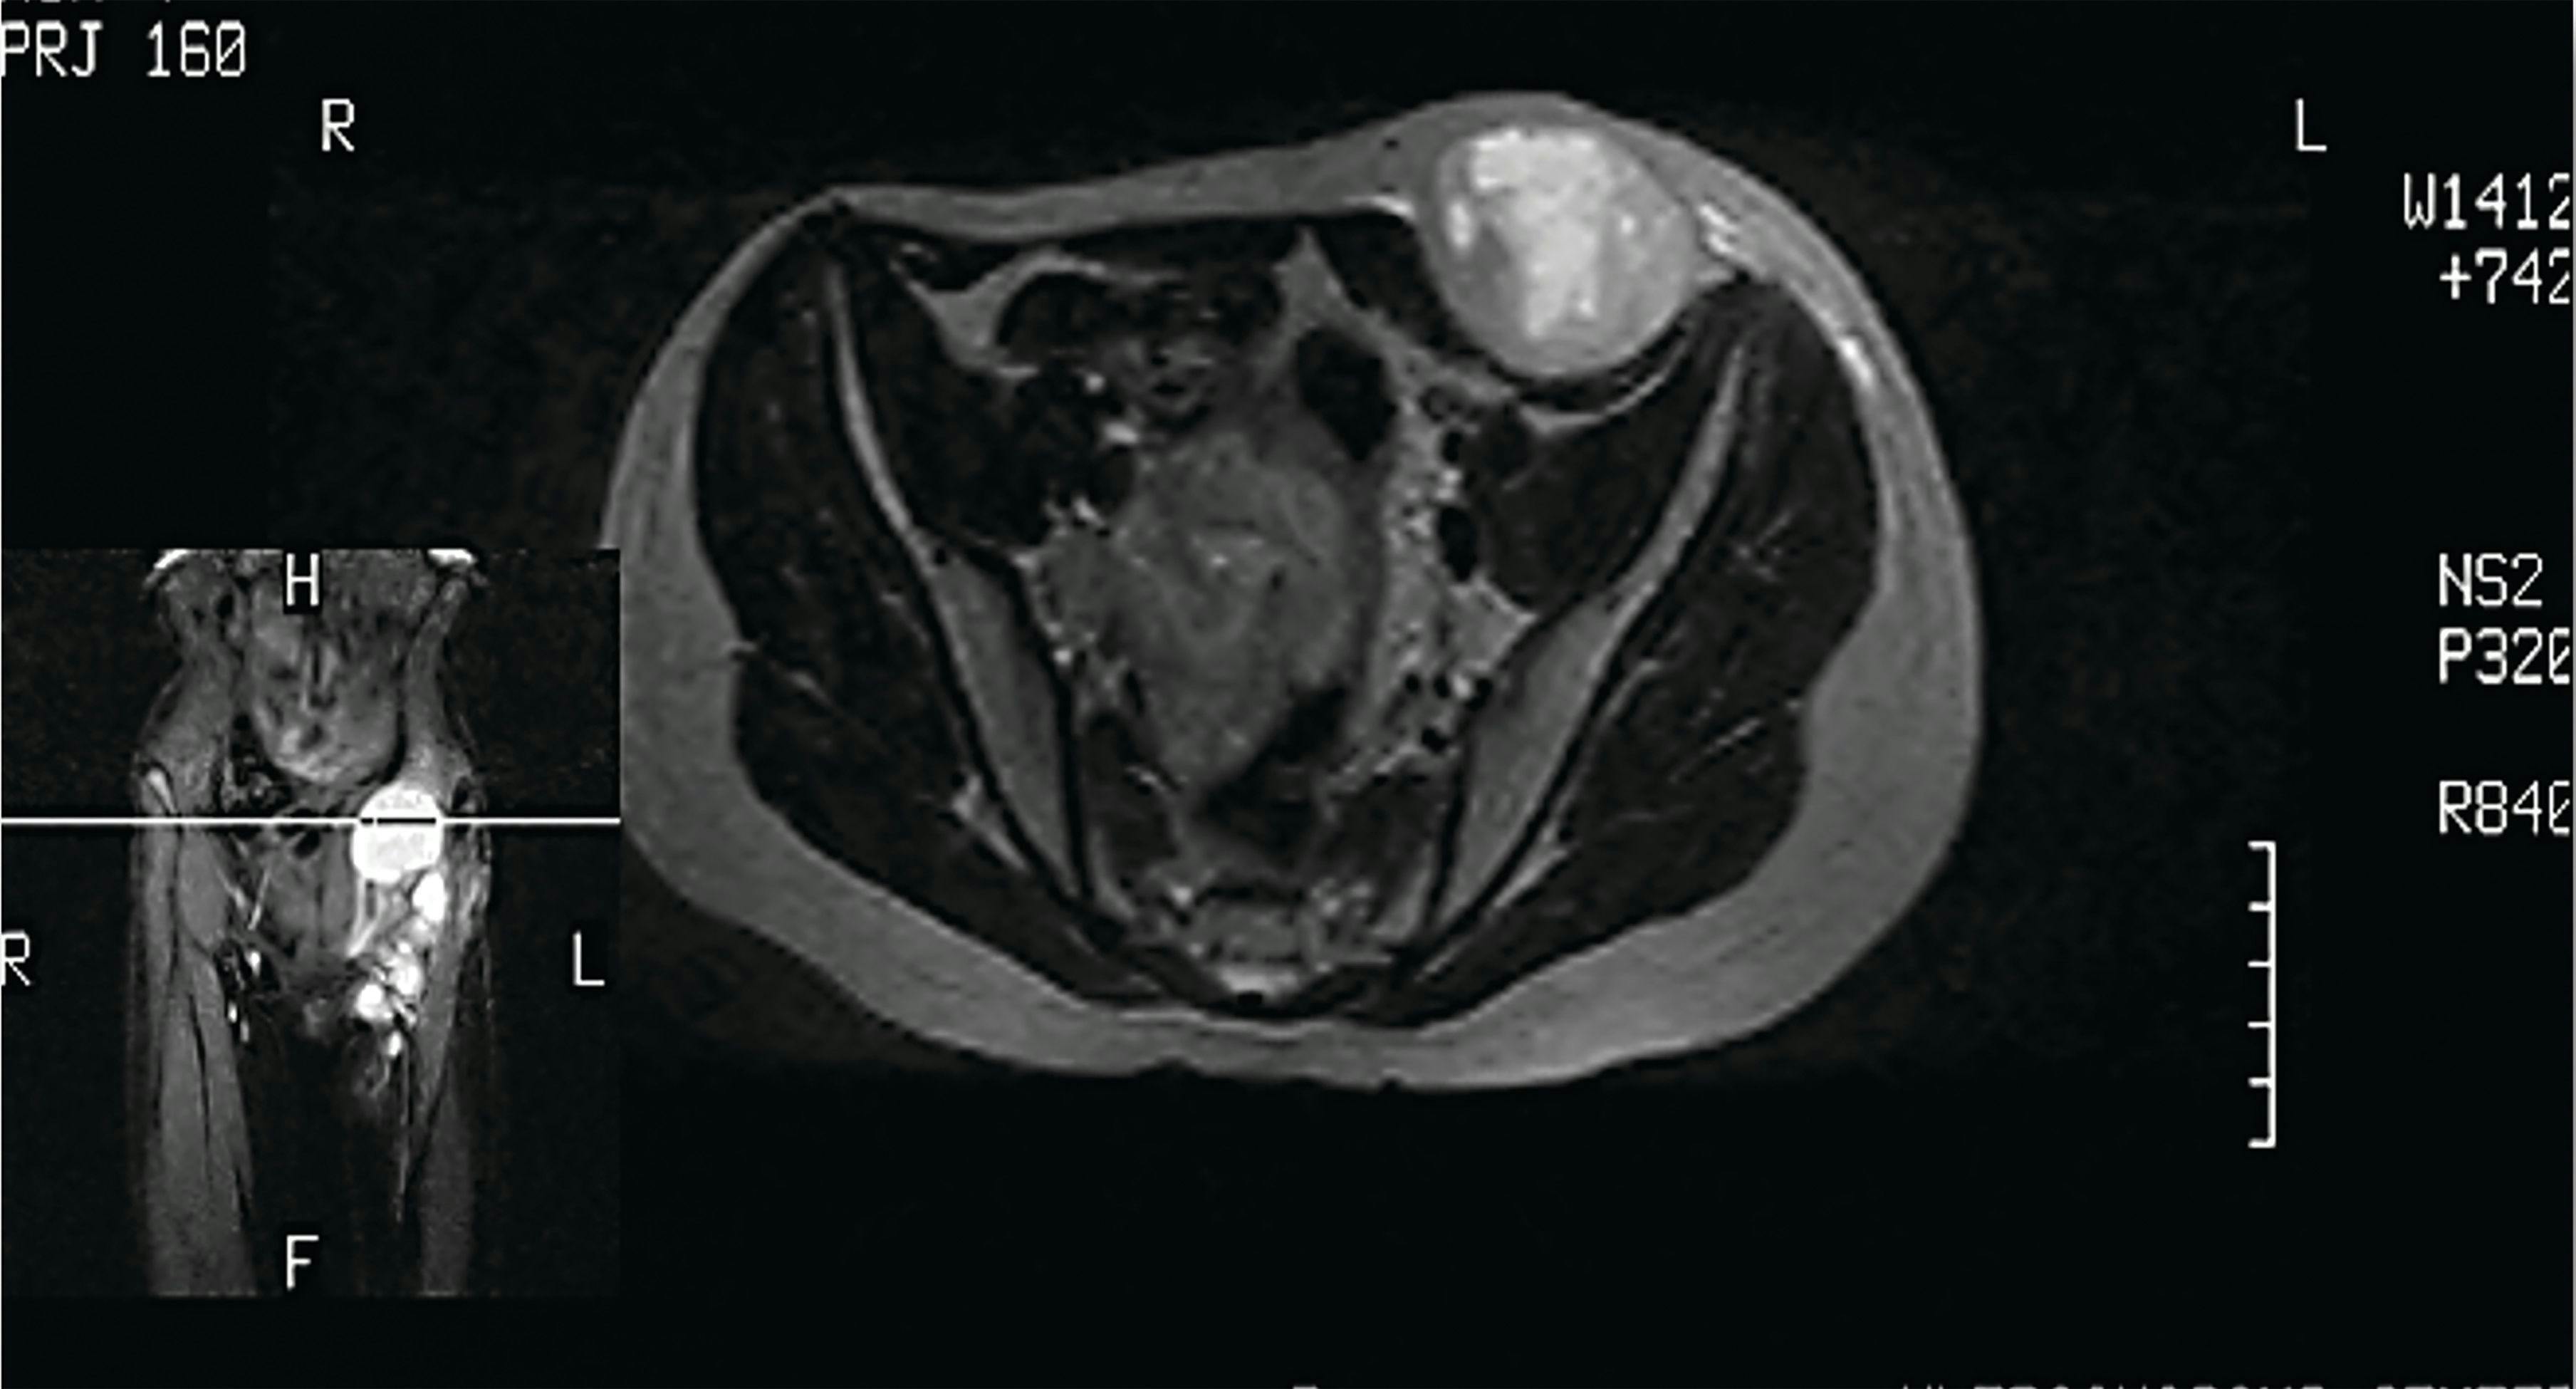 FIGURE 3a. The MRI Showed a Grape-Form Mass in the Abdominal Wall.